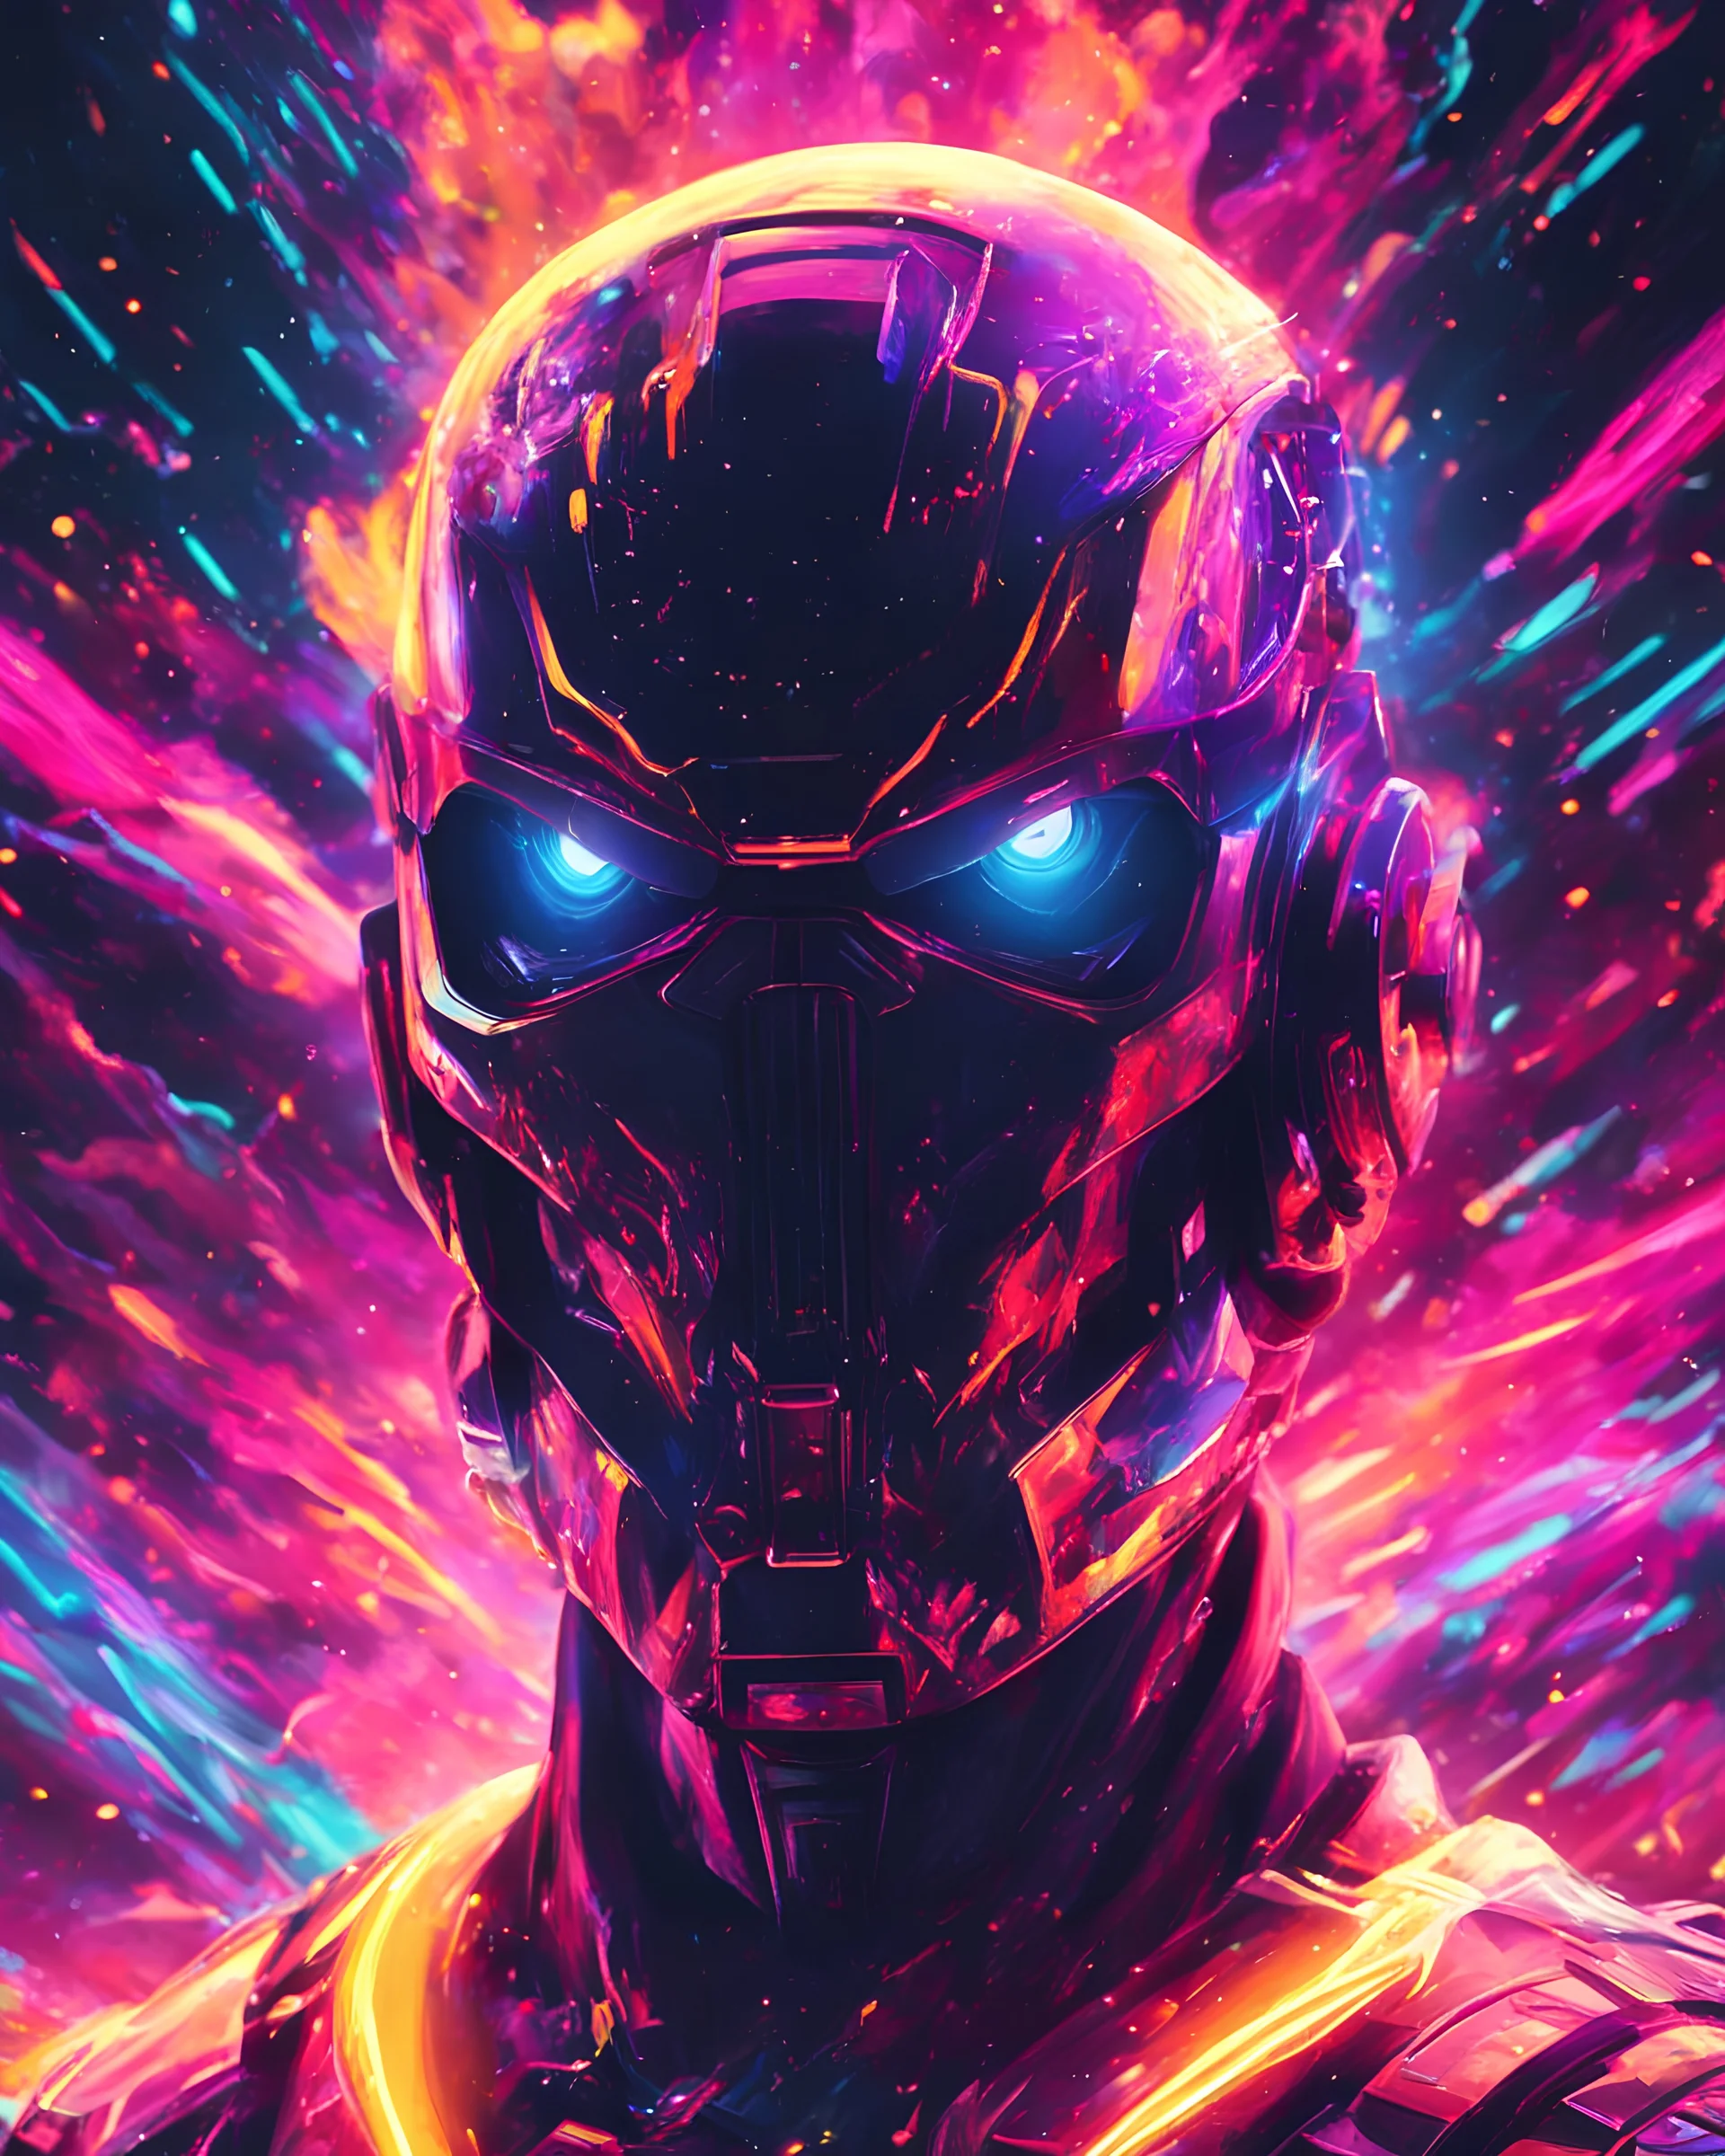 Close up shot of Doom Guy immersed in a vibrant synthwave dreamscape, neon chaos swirling energetically around pixelated forms, a dynamic fusion of retro gaming nostalgia and futuristic abstraction